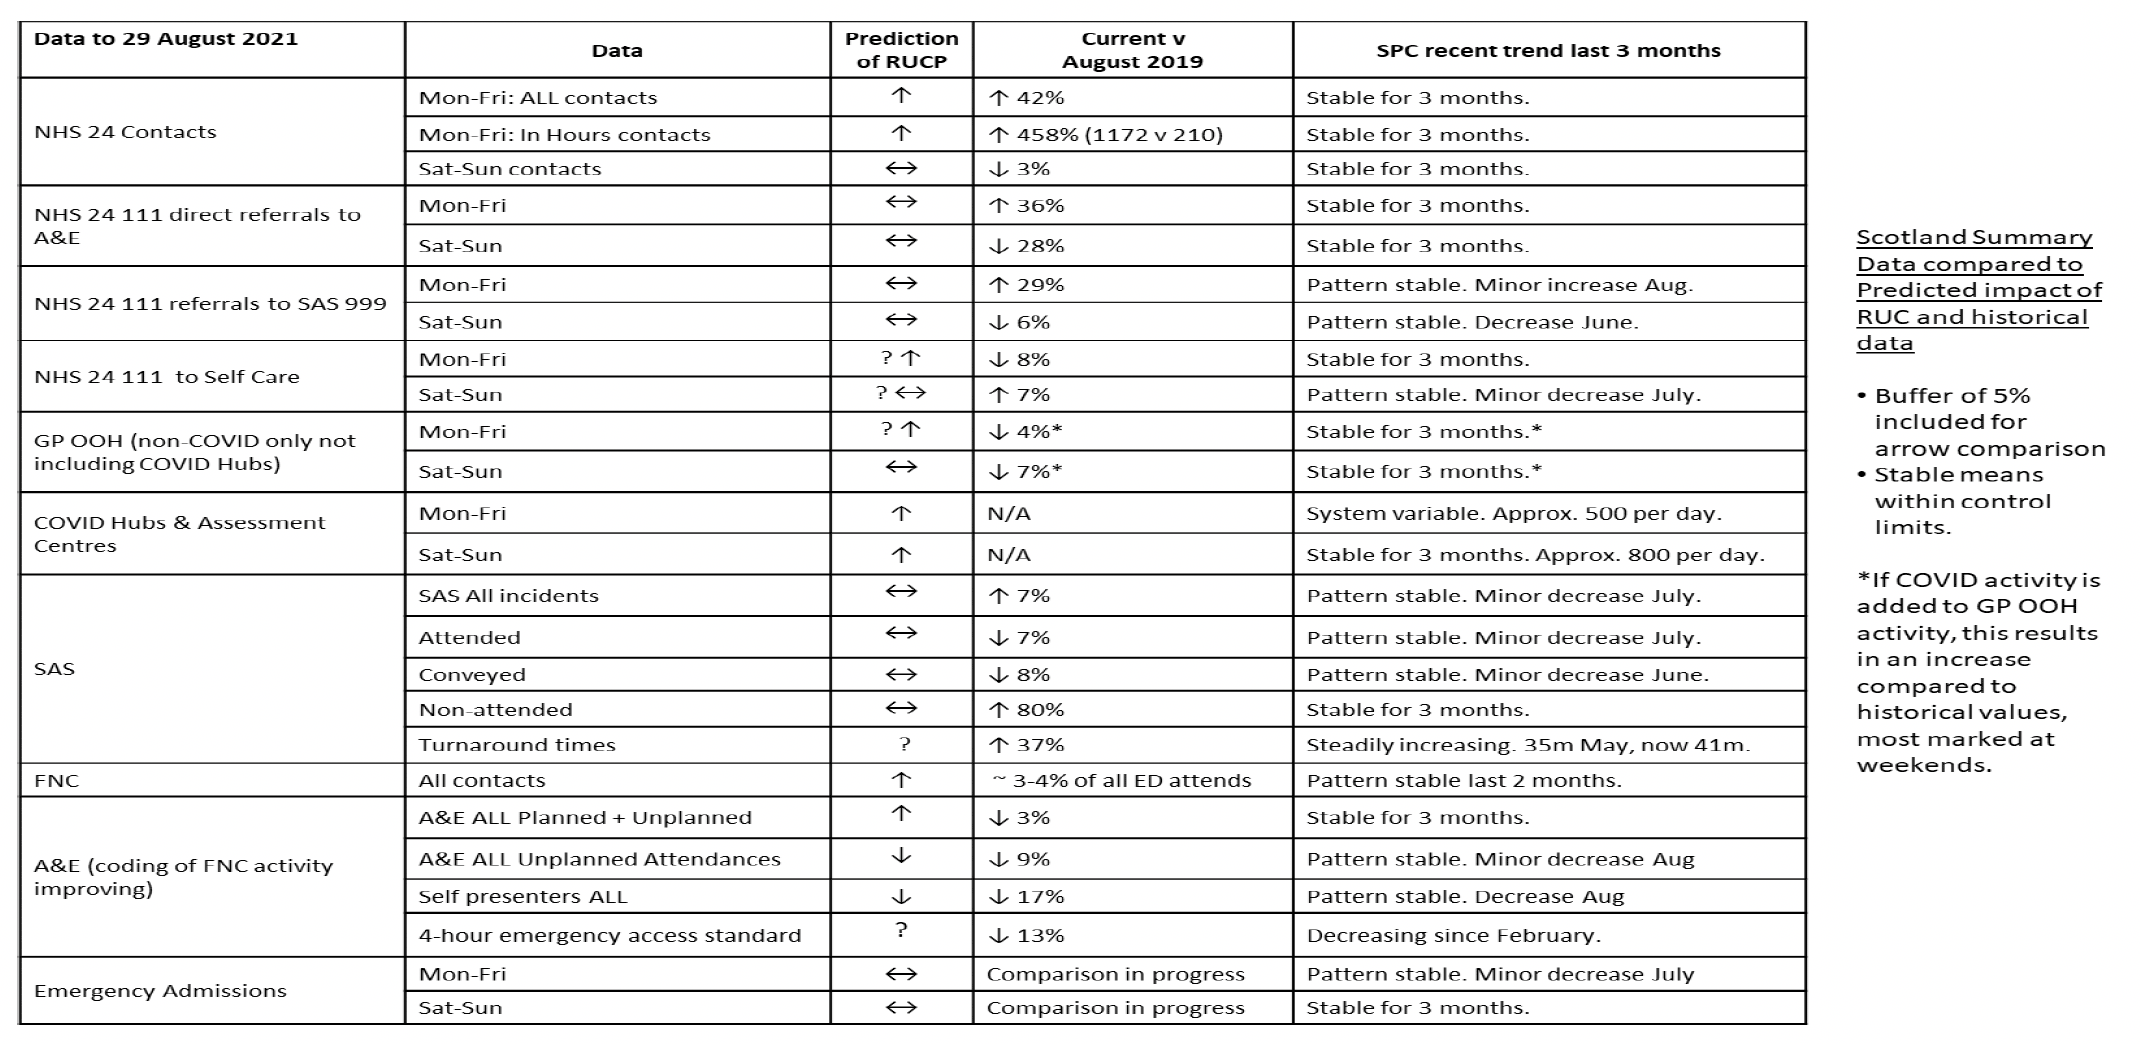 This table uses percentages for illustrative purposes. In interpreting these charts, it is important to consider the actual volume of activity as this more accurately reflects the demand that the individual services required to manage.